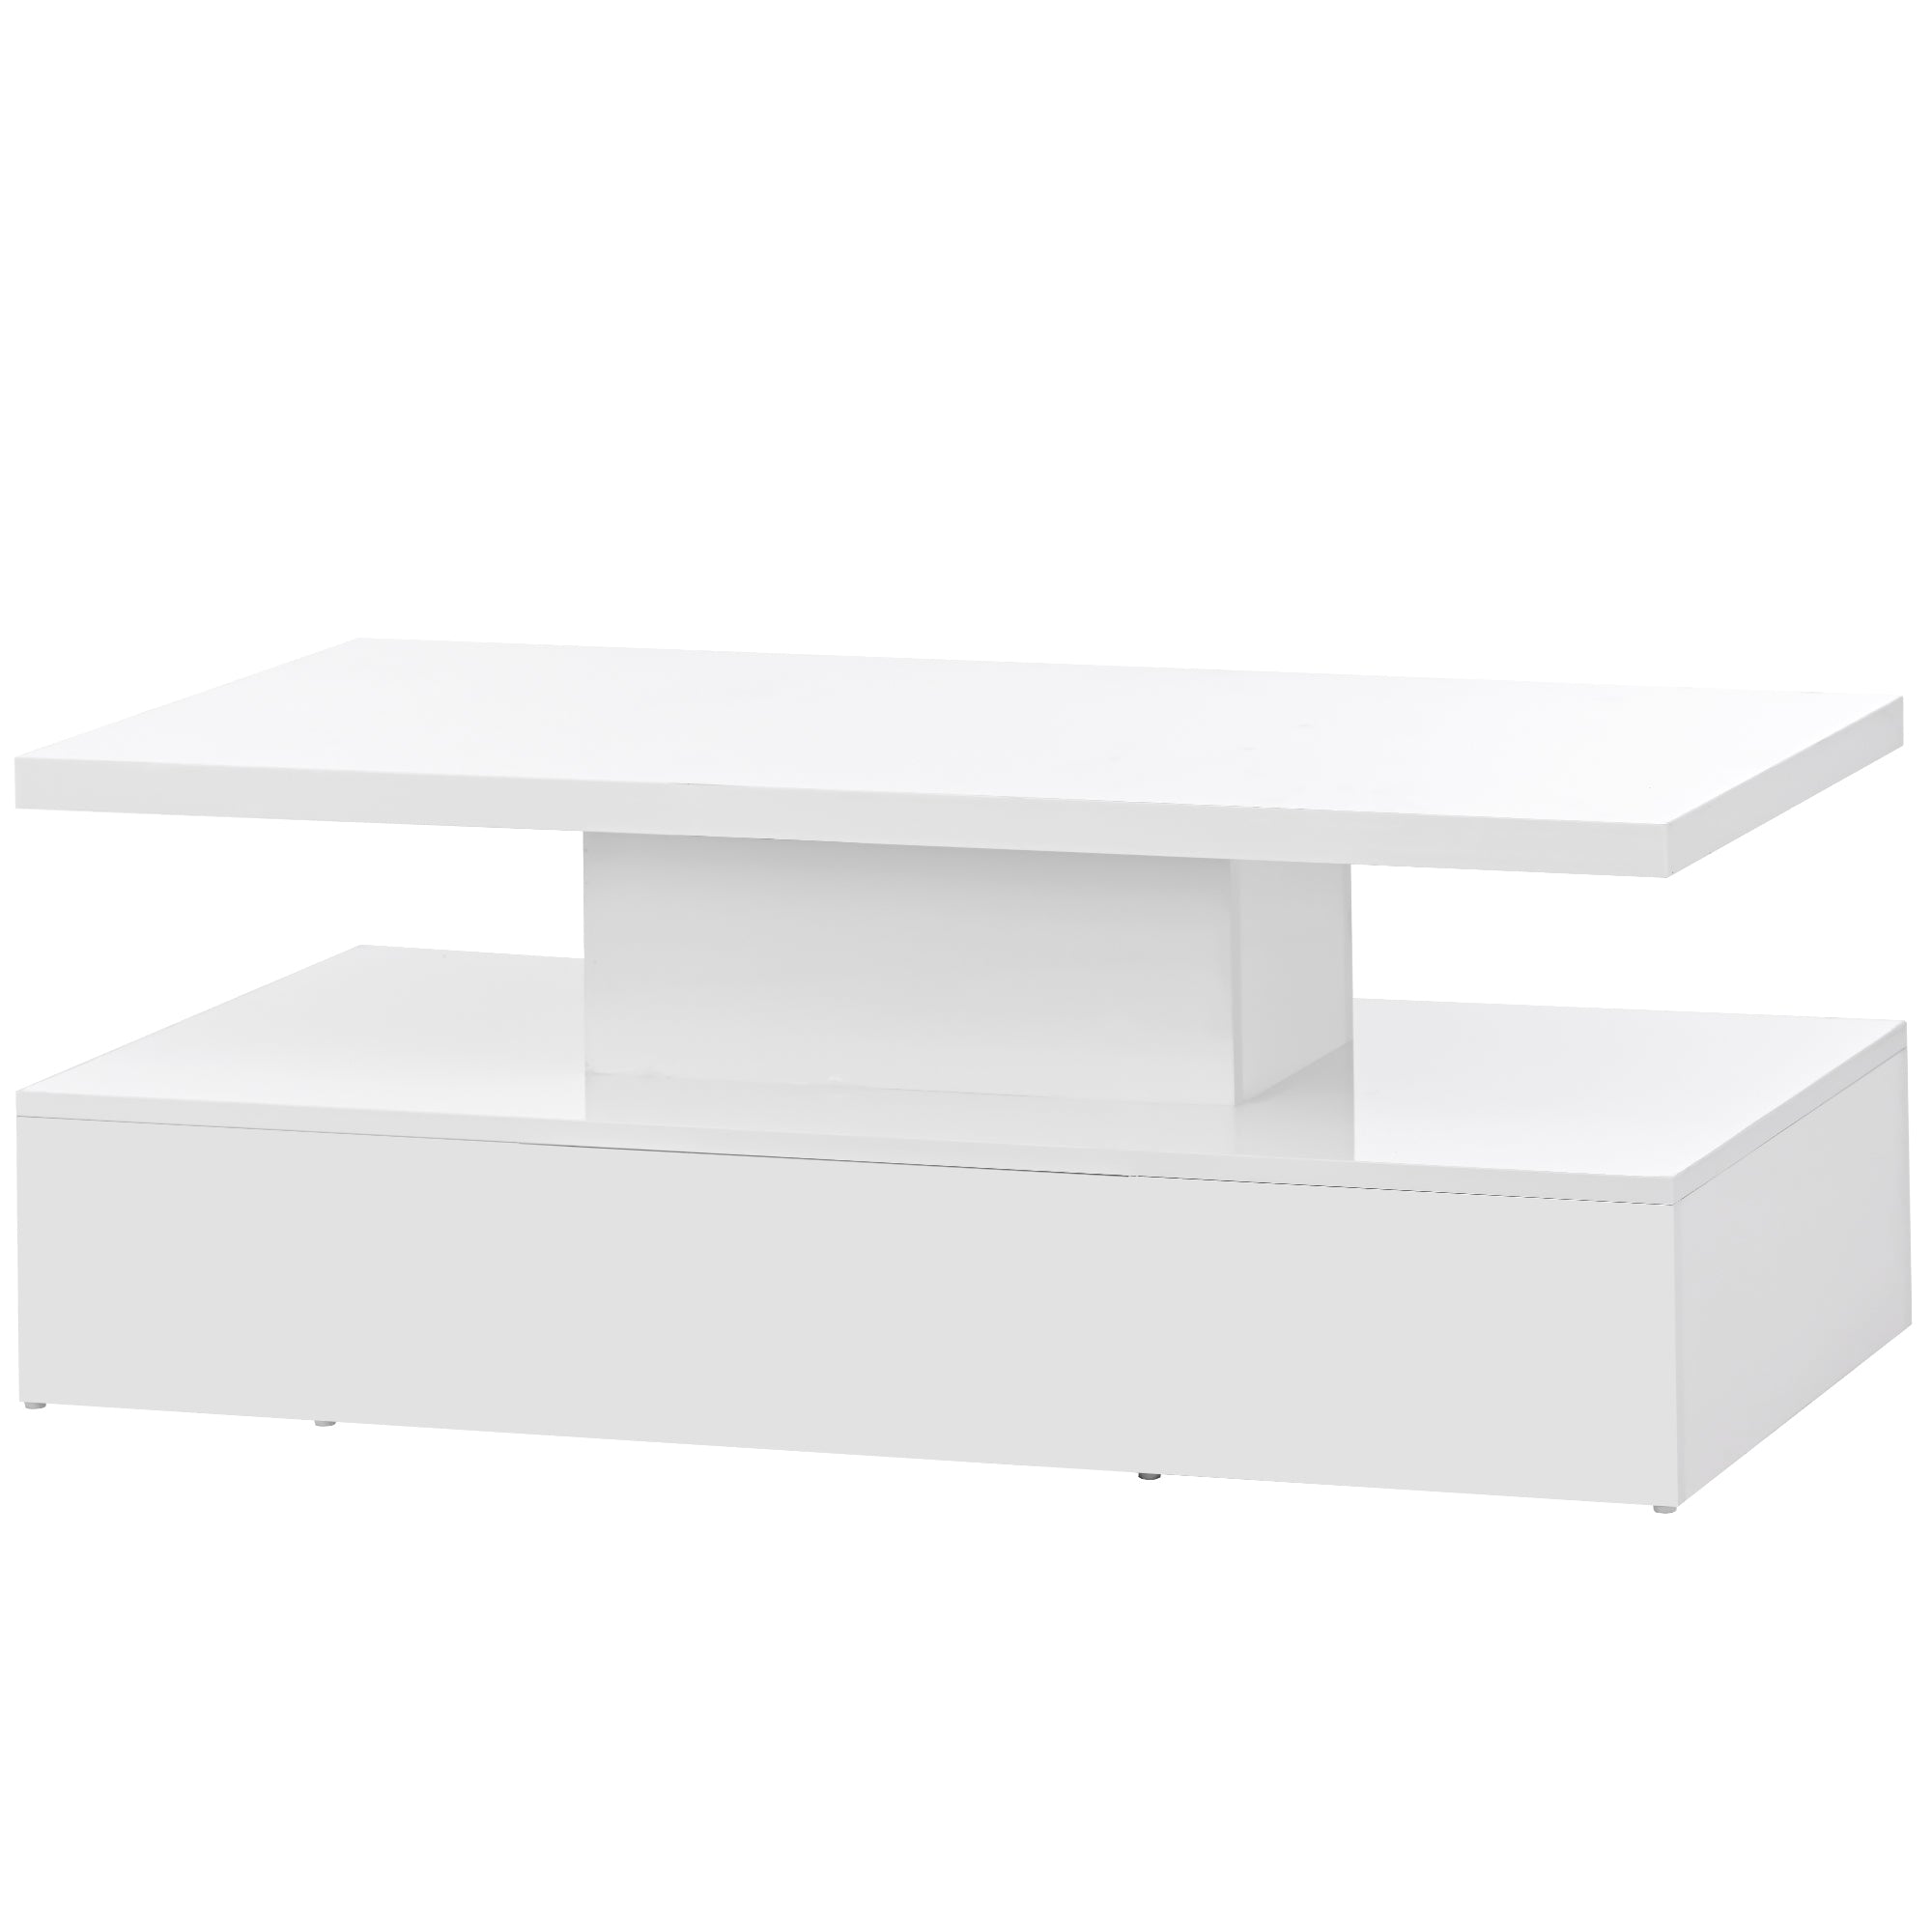 ON TREND Modern Glossy Coffee Table With Drawer, 2 white-particle board